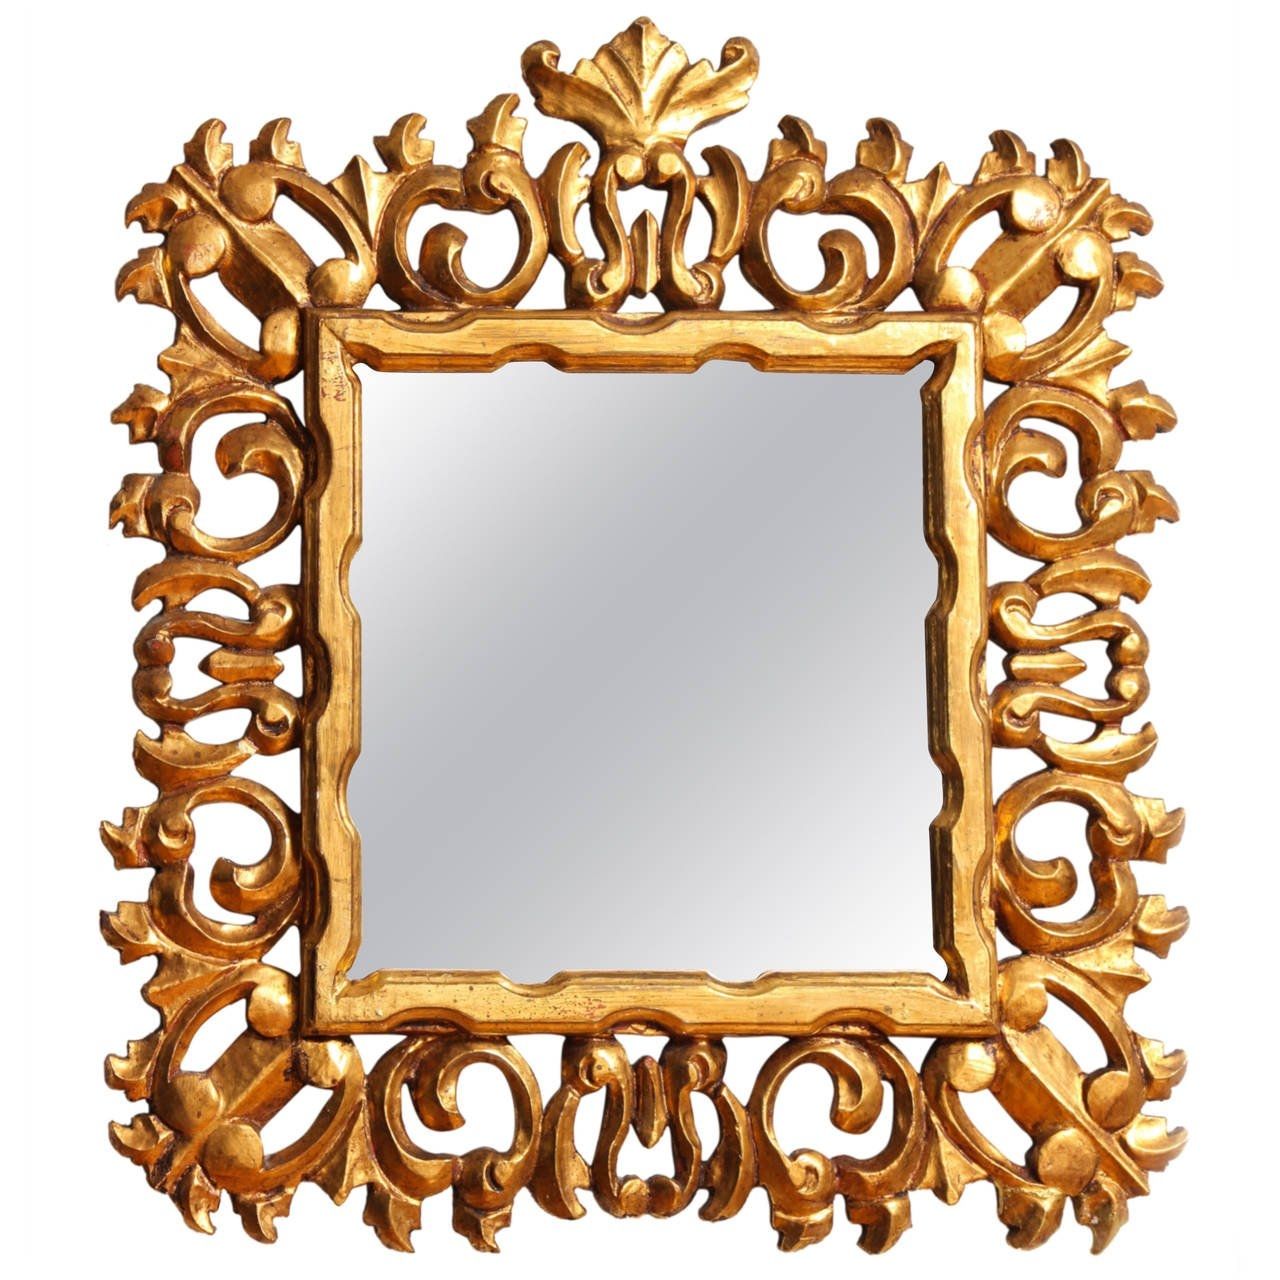 Carved And Gilded Italian Baroque Style Mirror Frame For Sale At Regarding Baroque Style Mirrors (View 4 of 15)